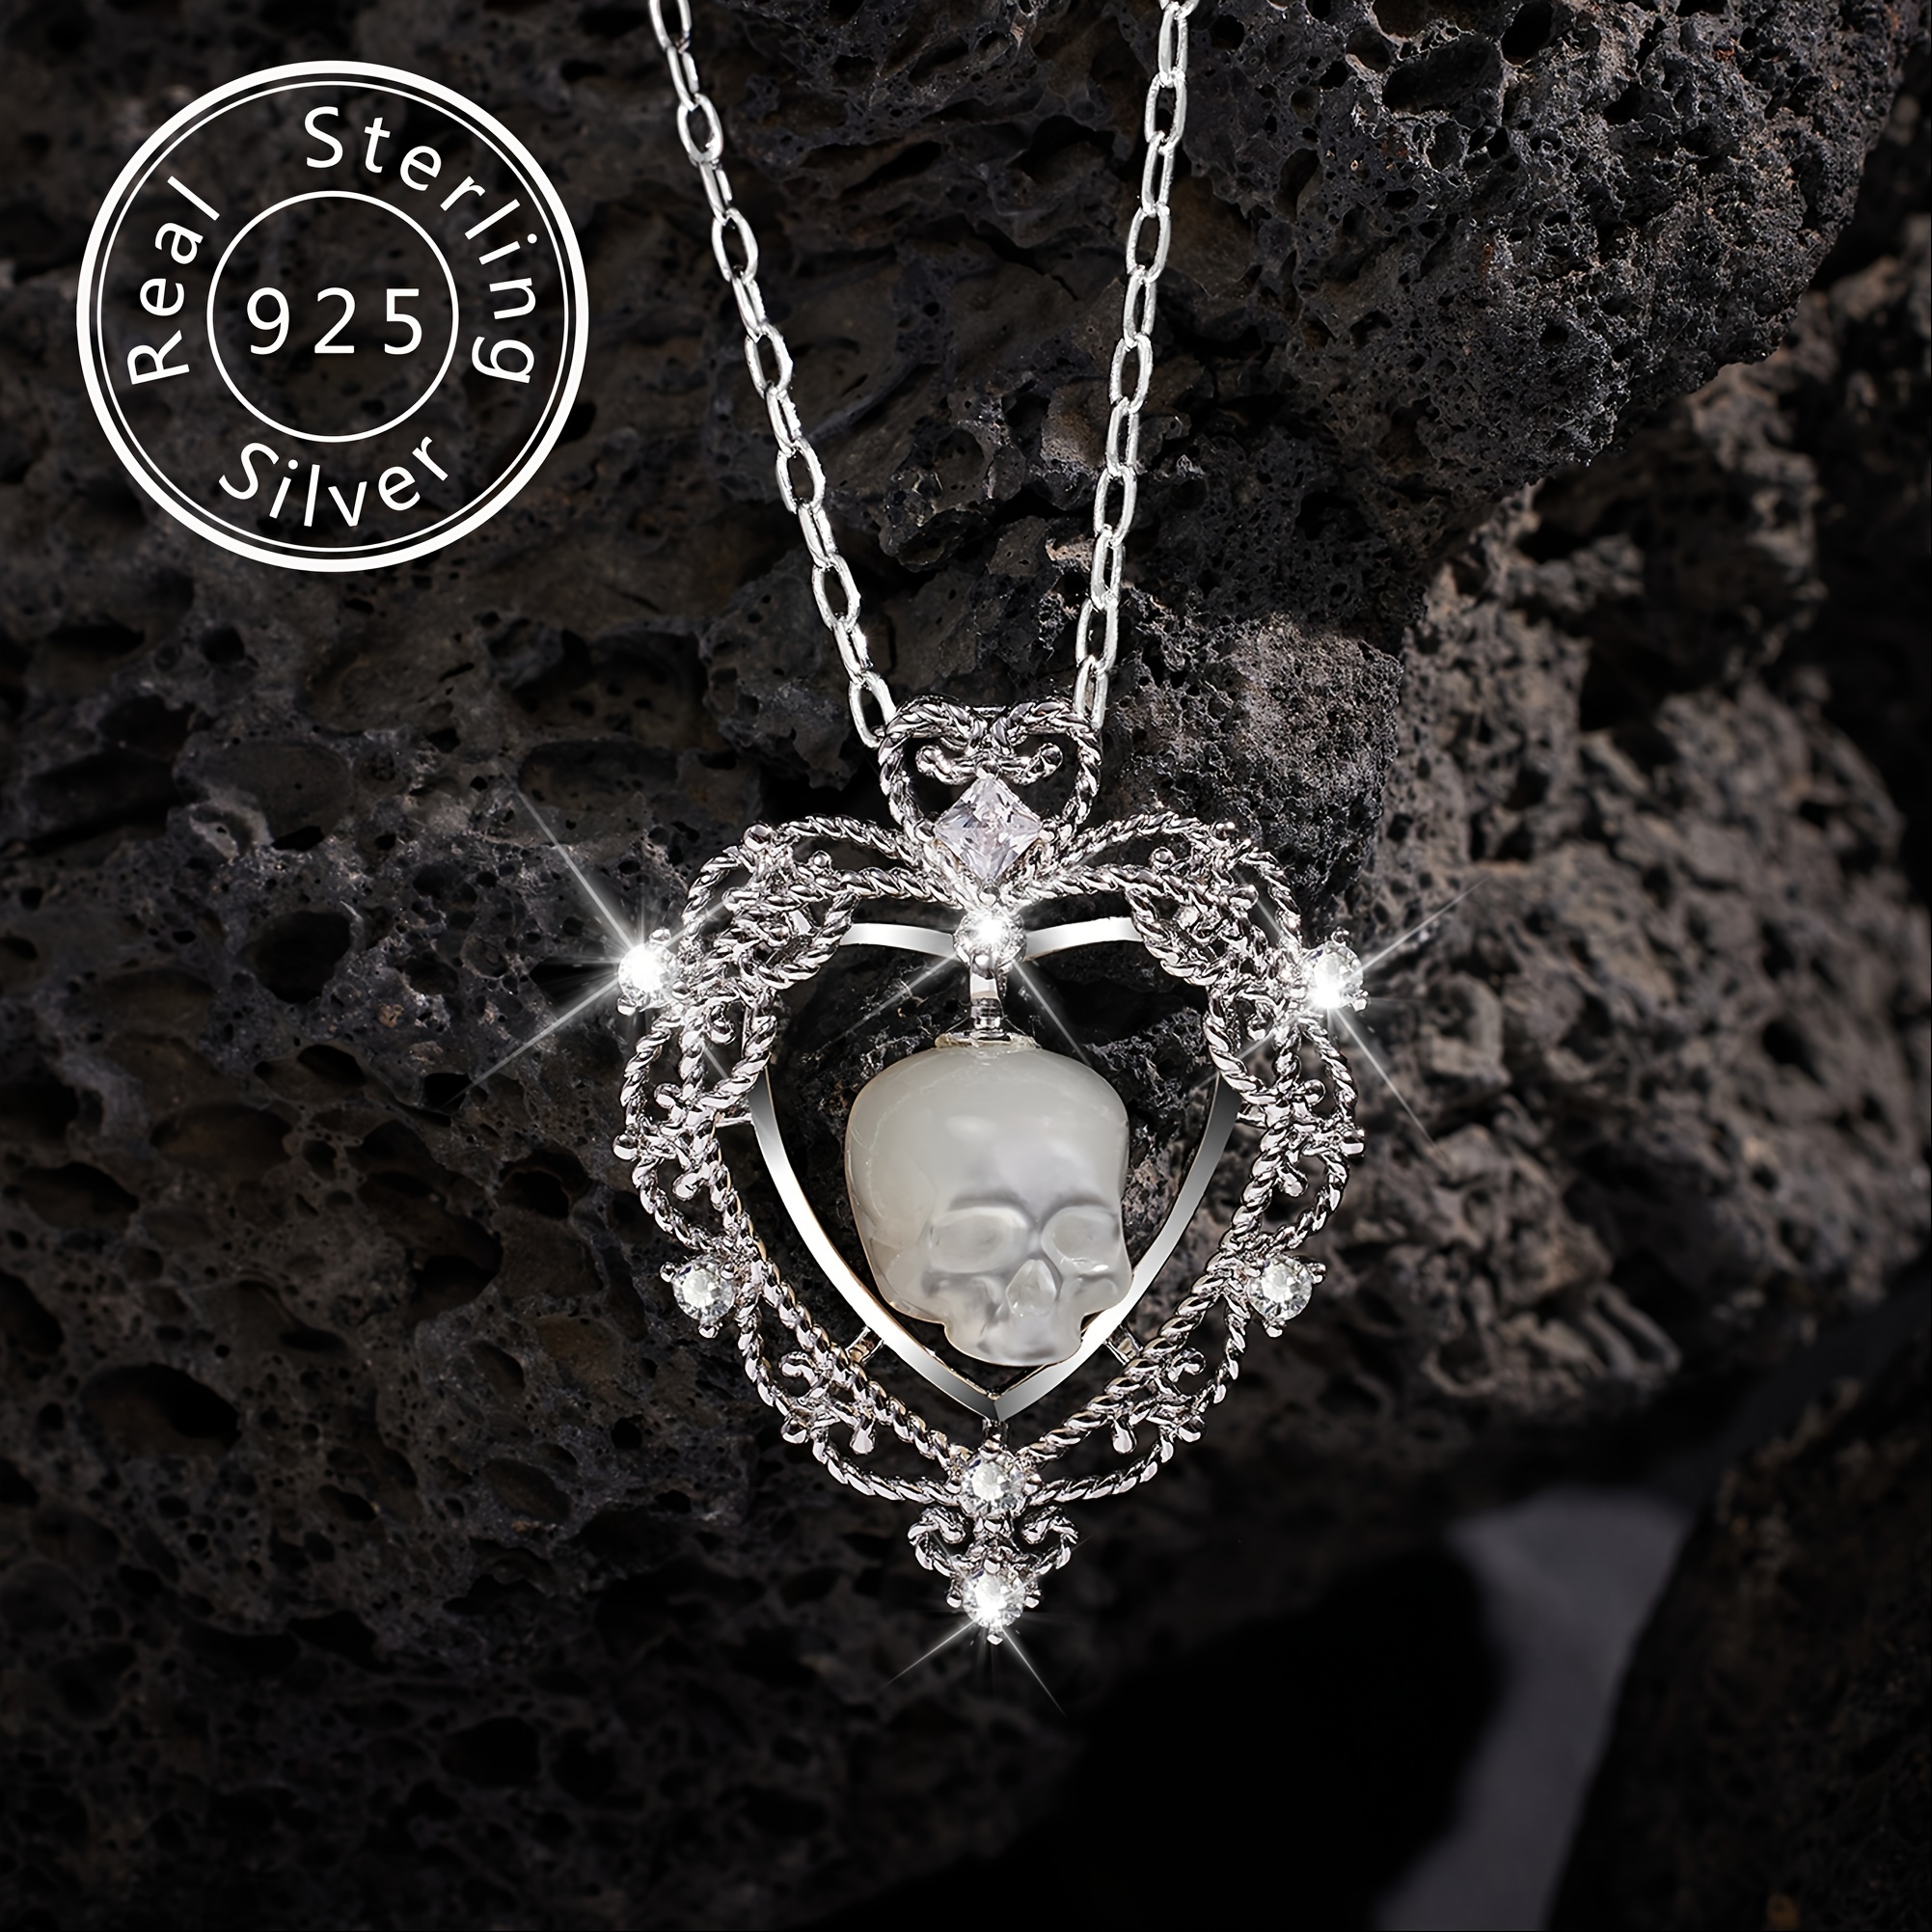 

1pc S925 Sterling Silver Gothic Style Love Heart Skull Head Pendant Necklace For Women, Commemorative Halloween Jewelry Gift 5.18g/0.18oz